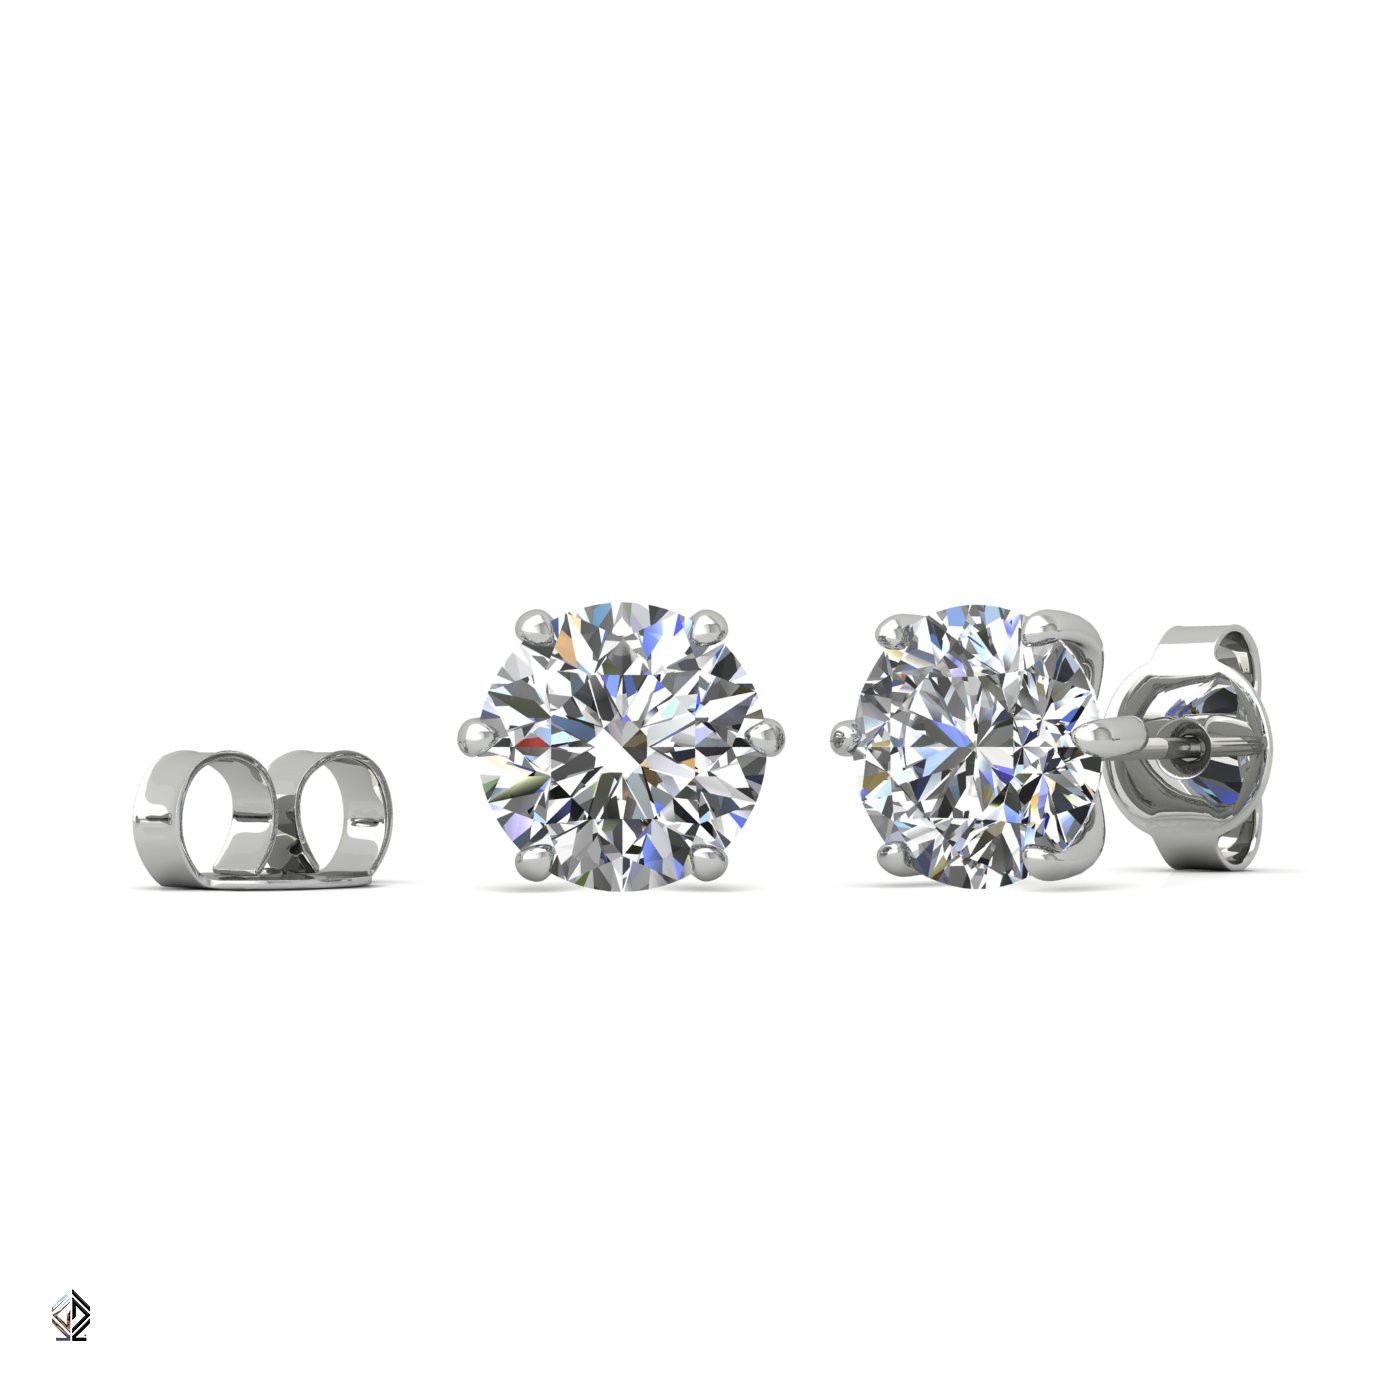 18k white gold 0,7 ct each (1,4 tcw) 6 prongs round shape diamond earrings Photos & images